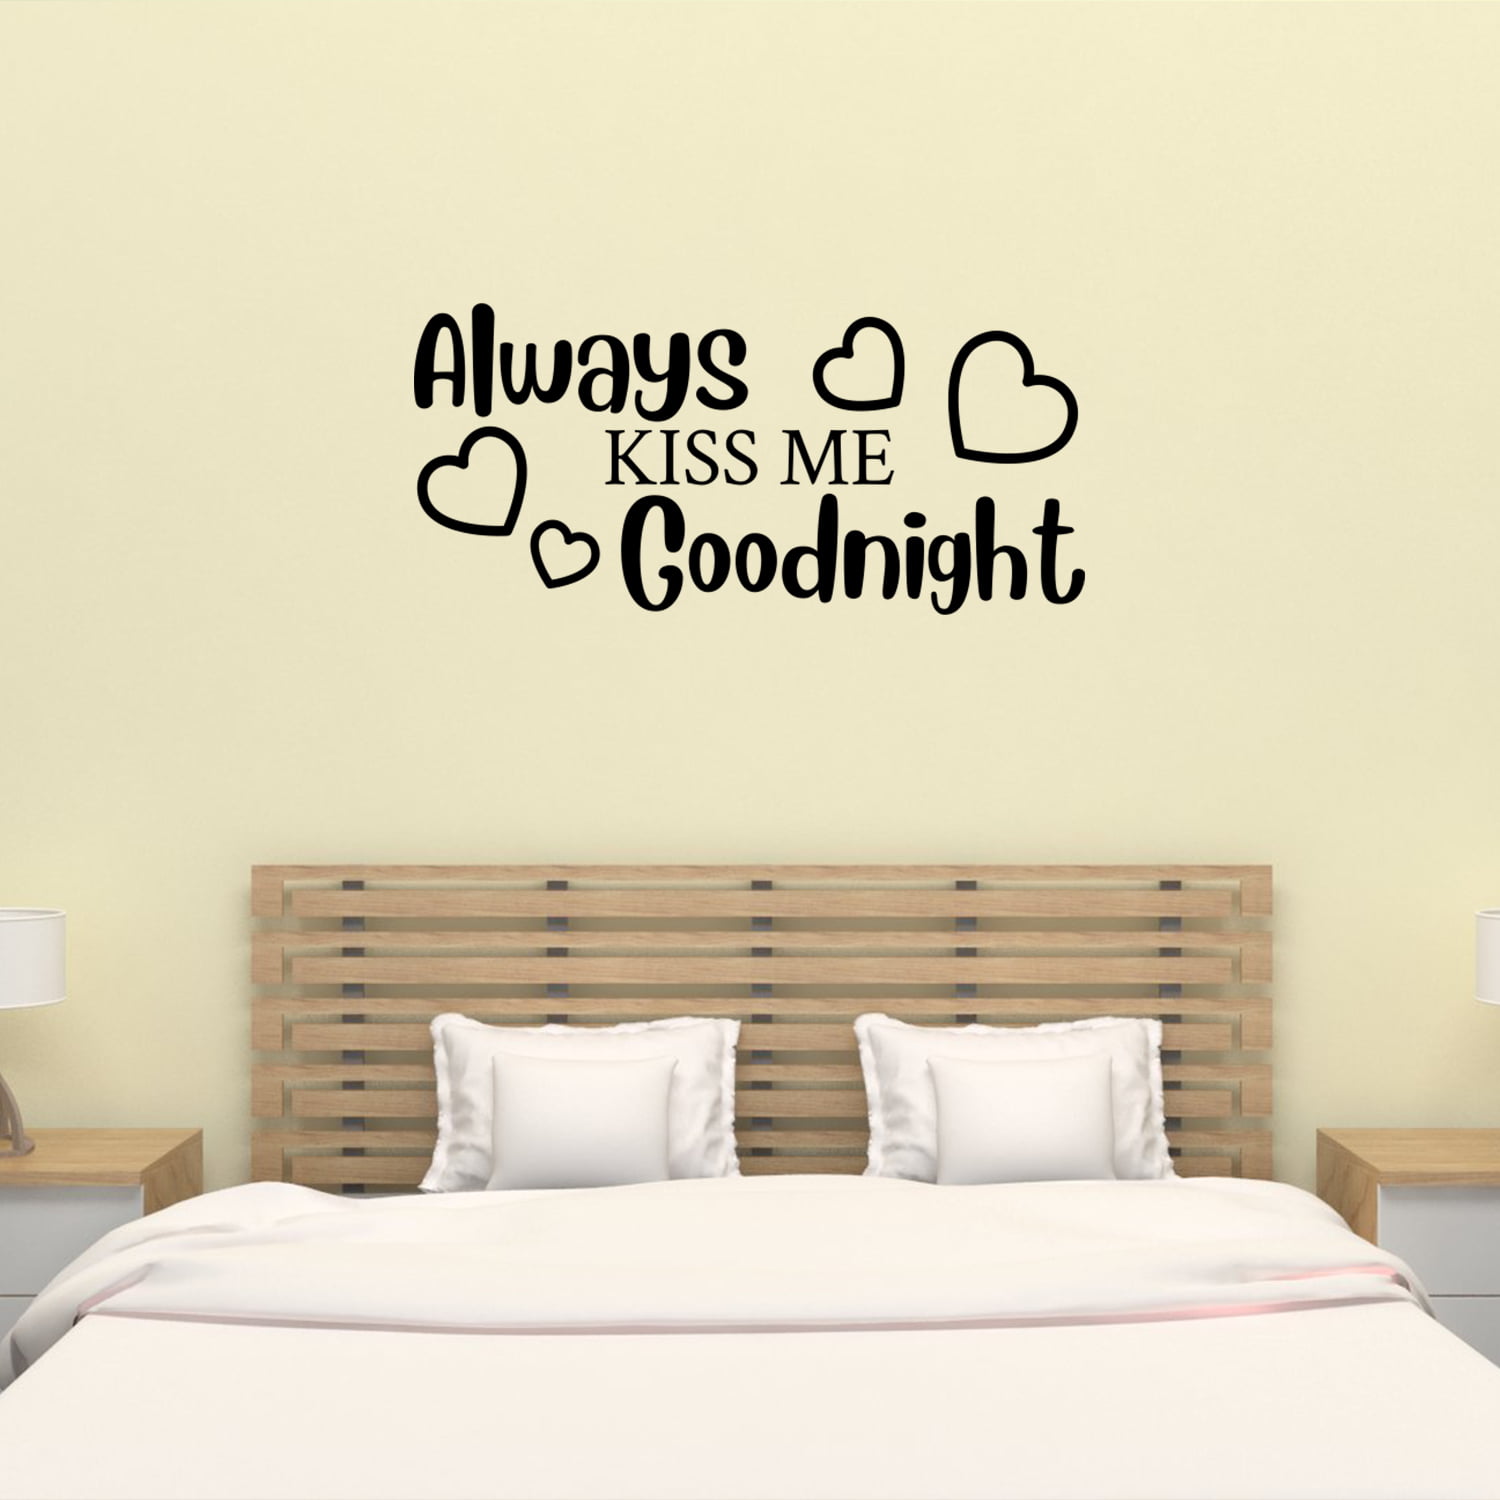 Always Kiss Me Goodnight Home Decor Blue Metal Light Switch Plate Cover 